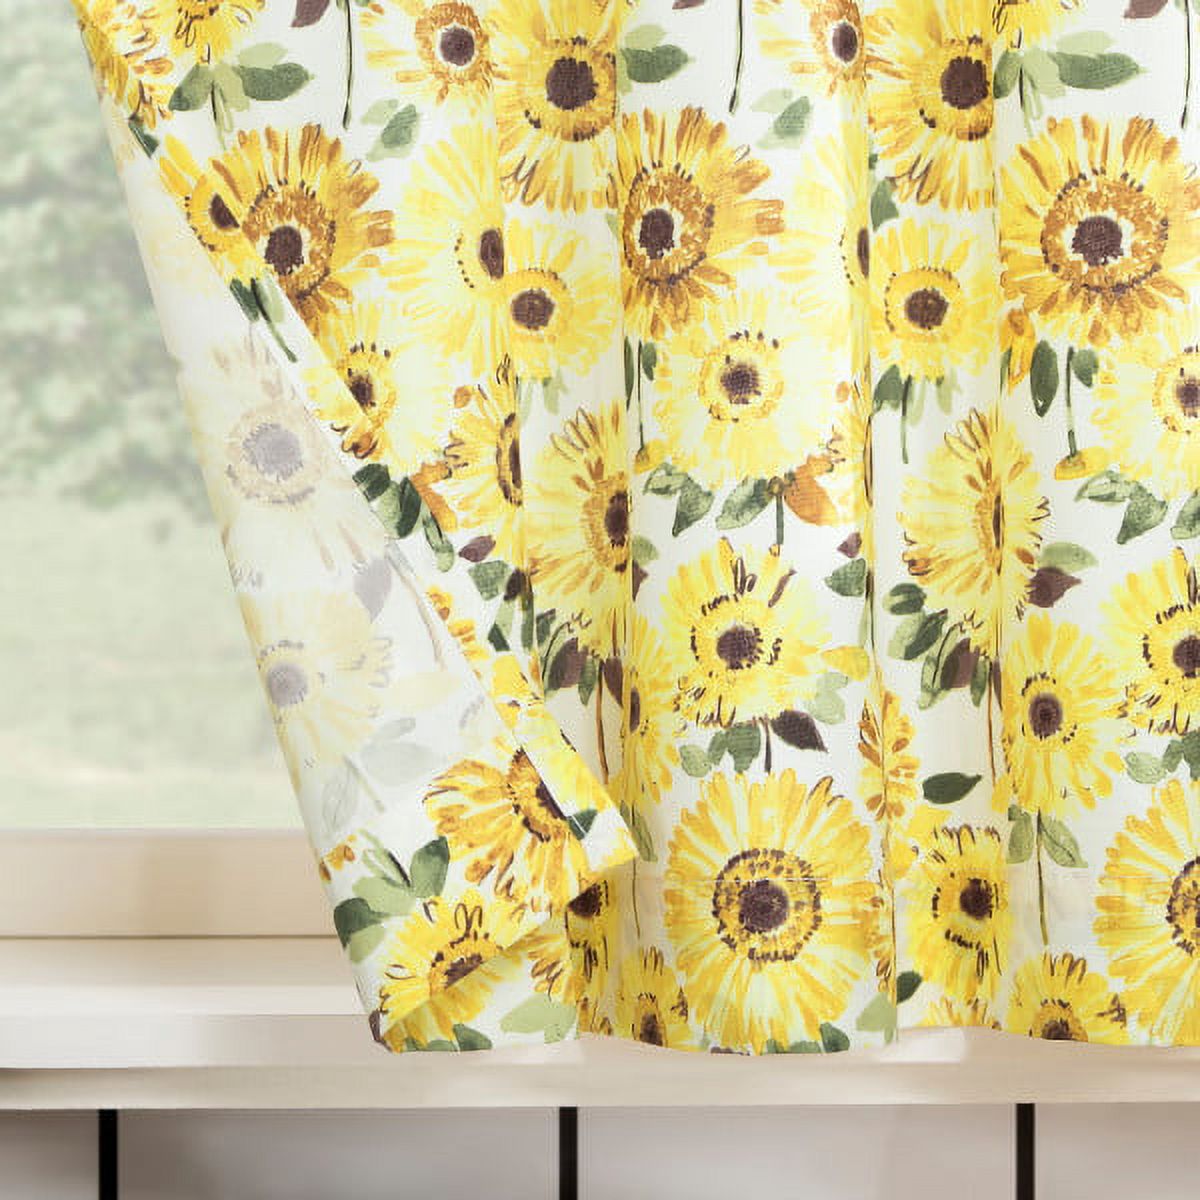 Mainstays Sunflower 3-Piece Kitchen Curtain Tier and Valance Set 54"x 36" in Multi - image 3 of 4